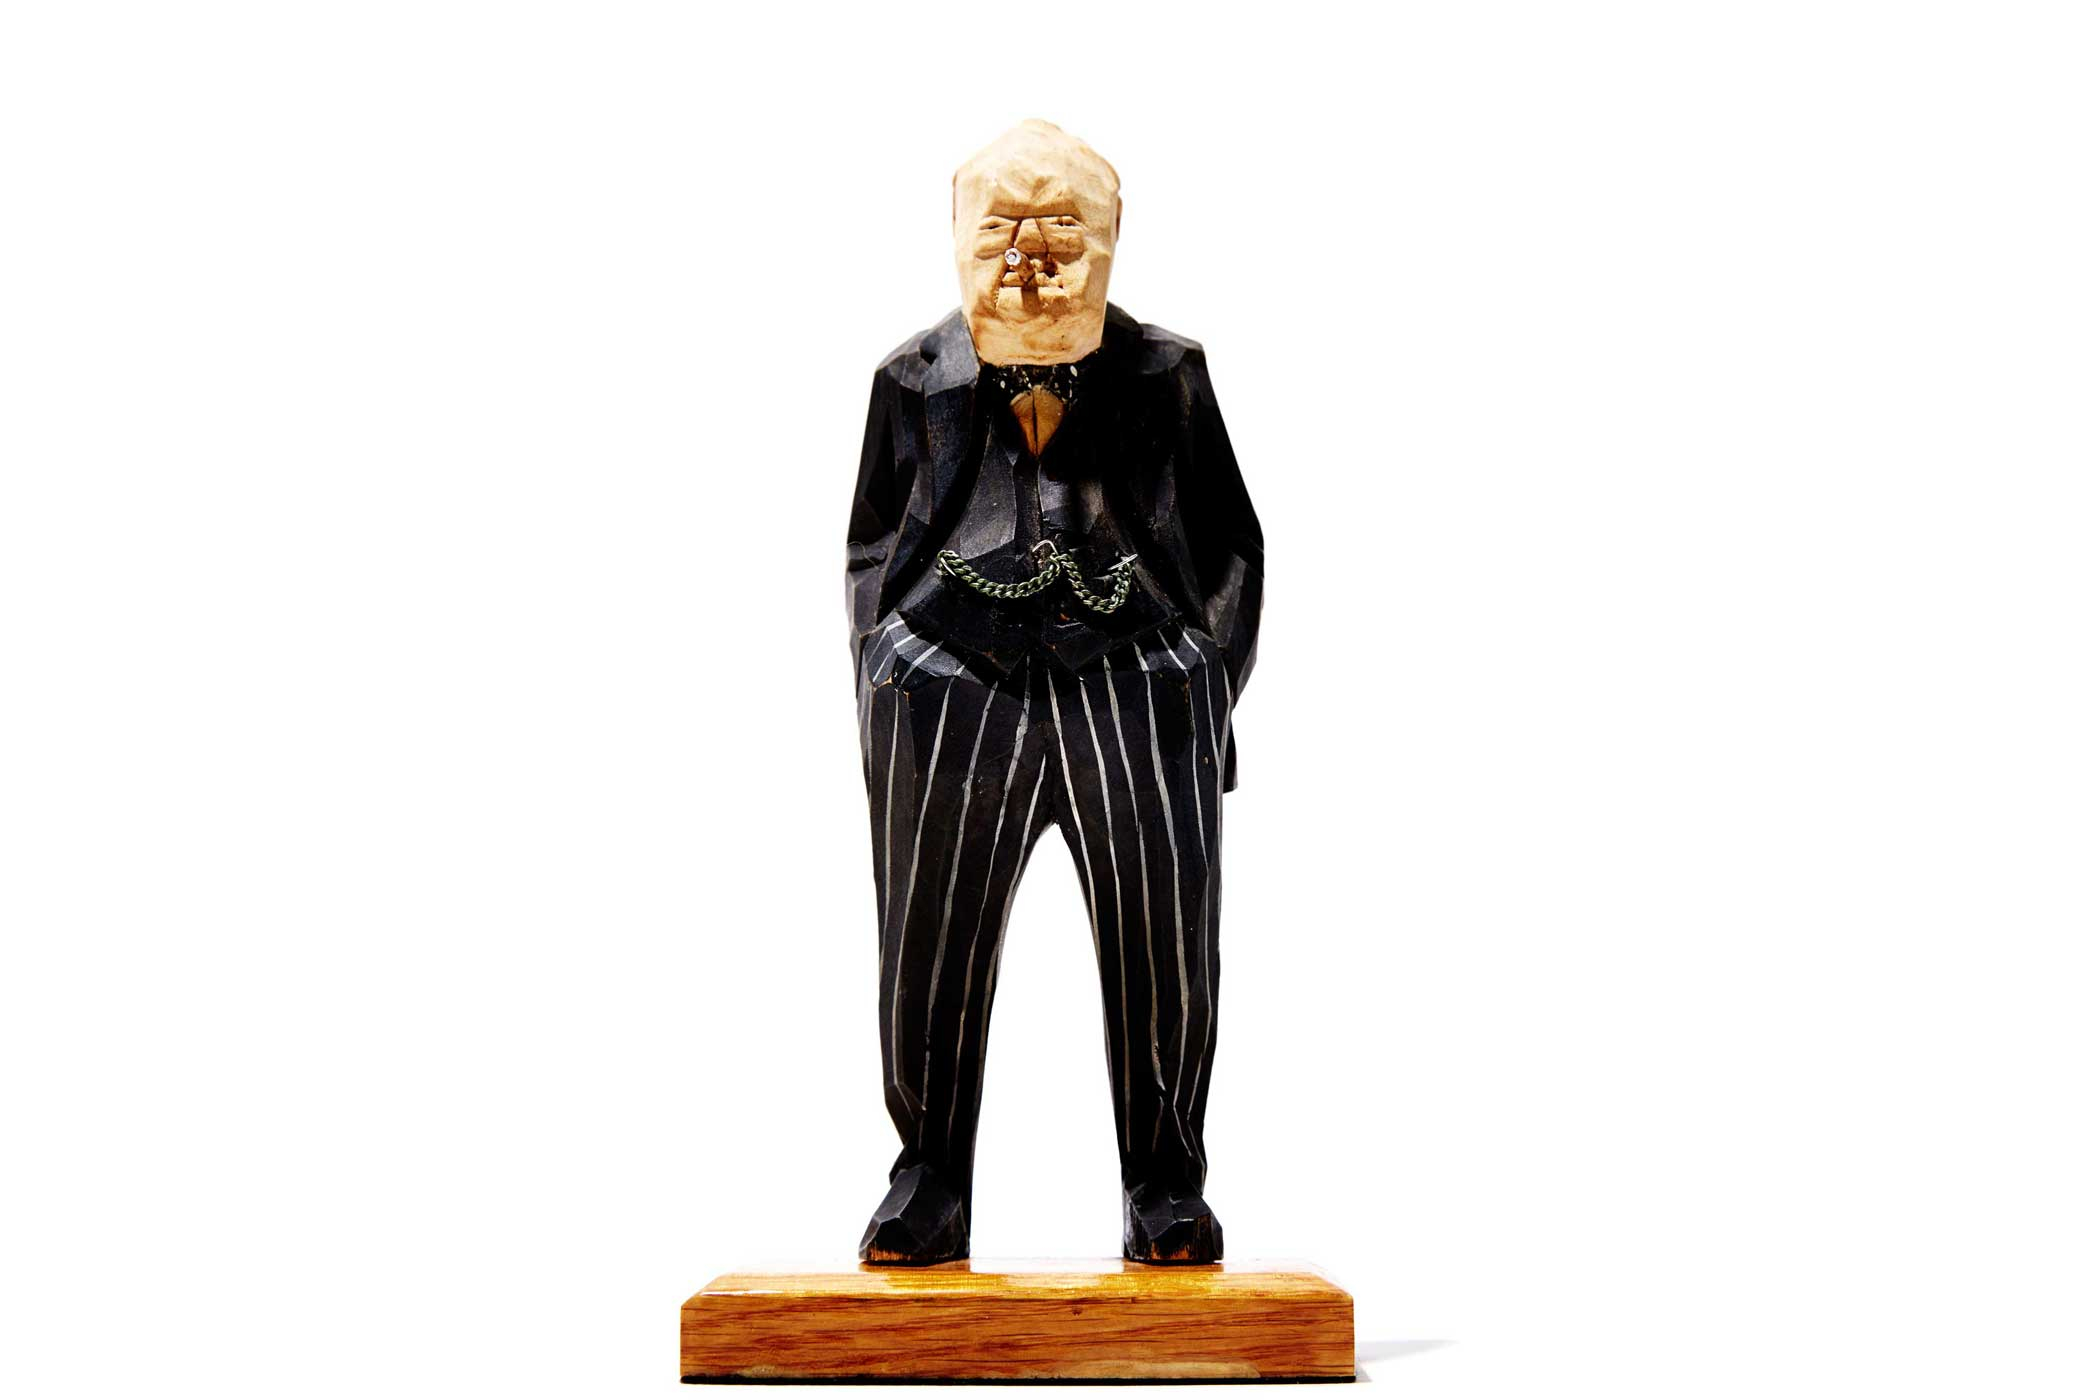 2. Bob Iger’s Winston Churchill Figurine
                              “It was carved by a dear friend of my father’s and given to me as a gift when I was 11 or 12,” says the Disney CEO. “It’s been on every one of my desks for almost 40 years as a reminder of leadership, perseverance and eternal hope that good conquers evil.”